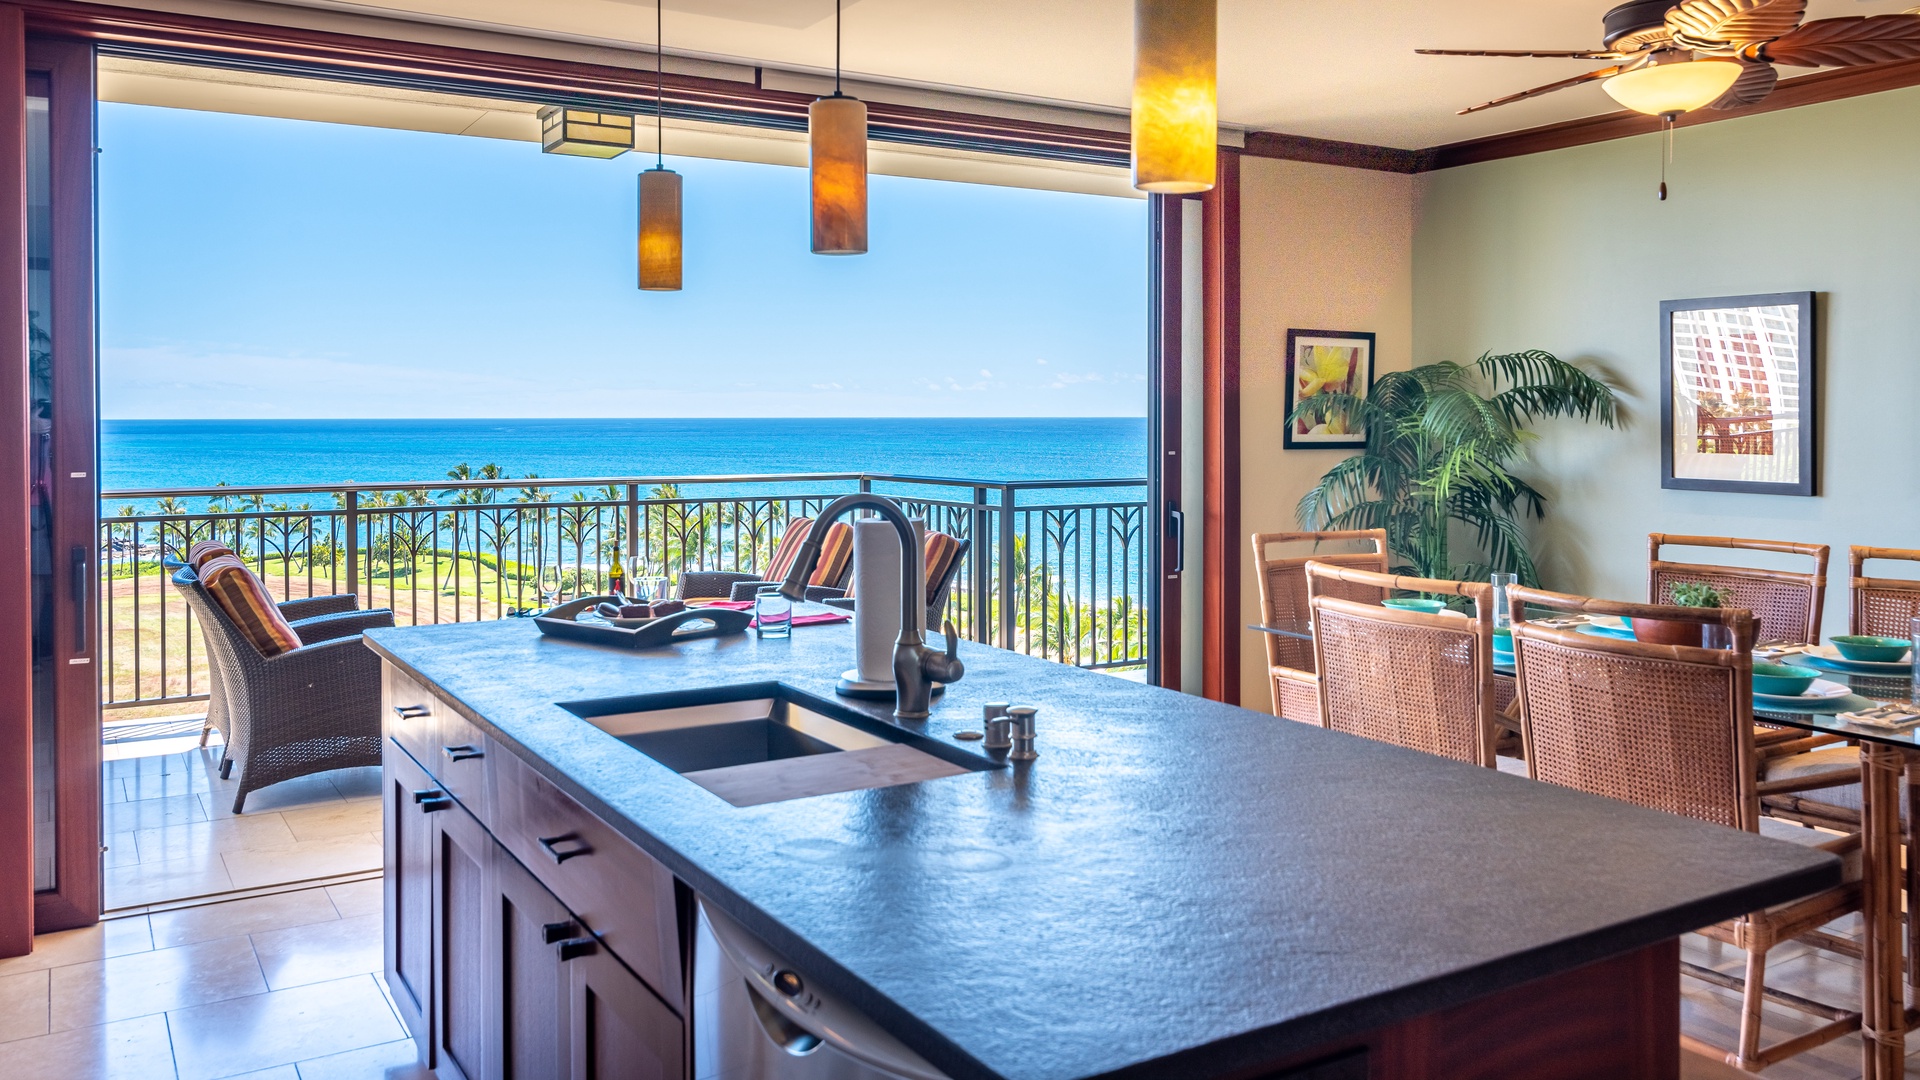 Kapolei Vacation Rentals, Ko Olina Beach Villas B901 - Every chef will delight in the views looking out from the kitchen.